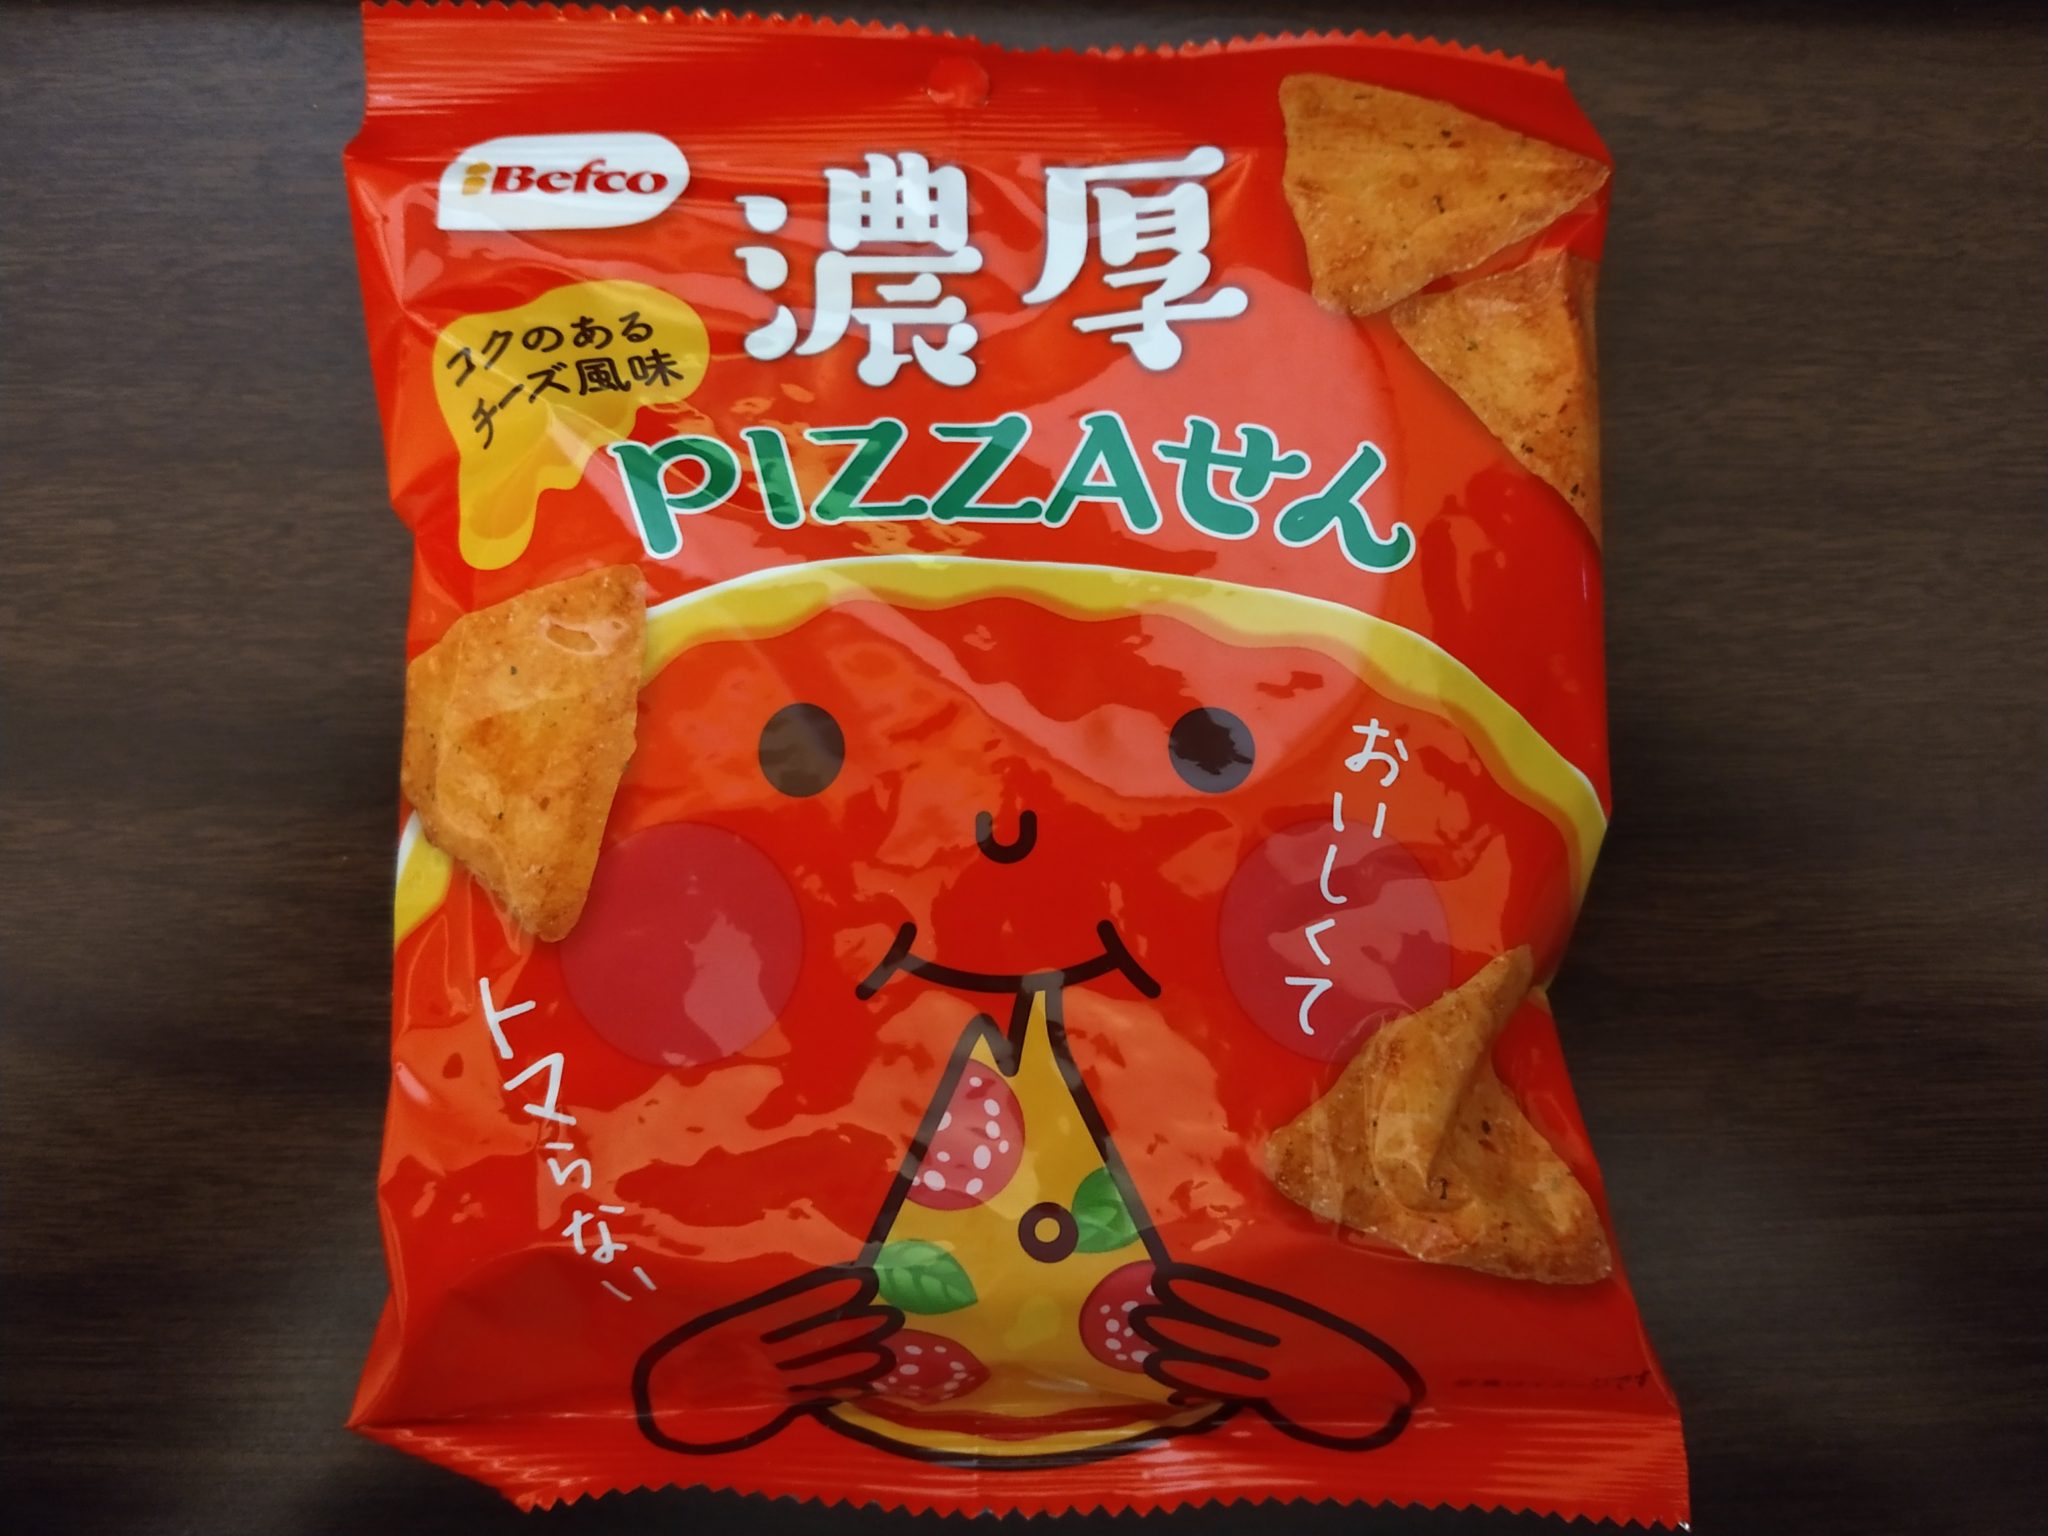 Befco Rice Crackers – Pizza